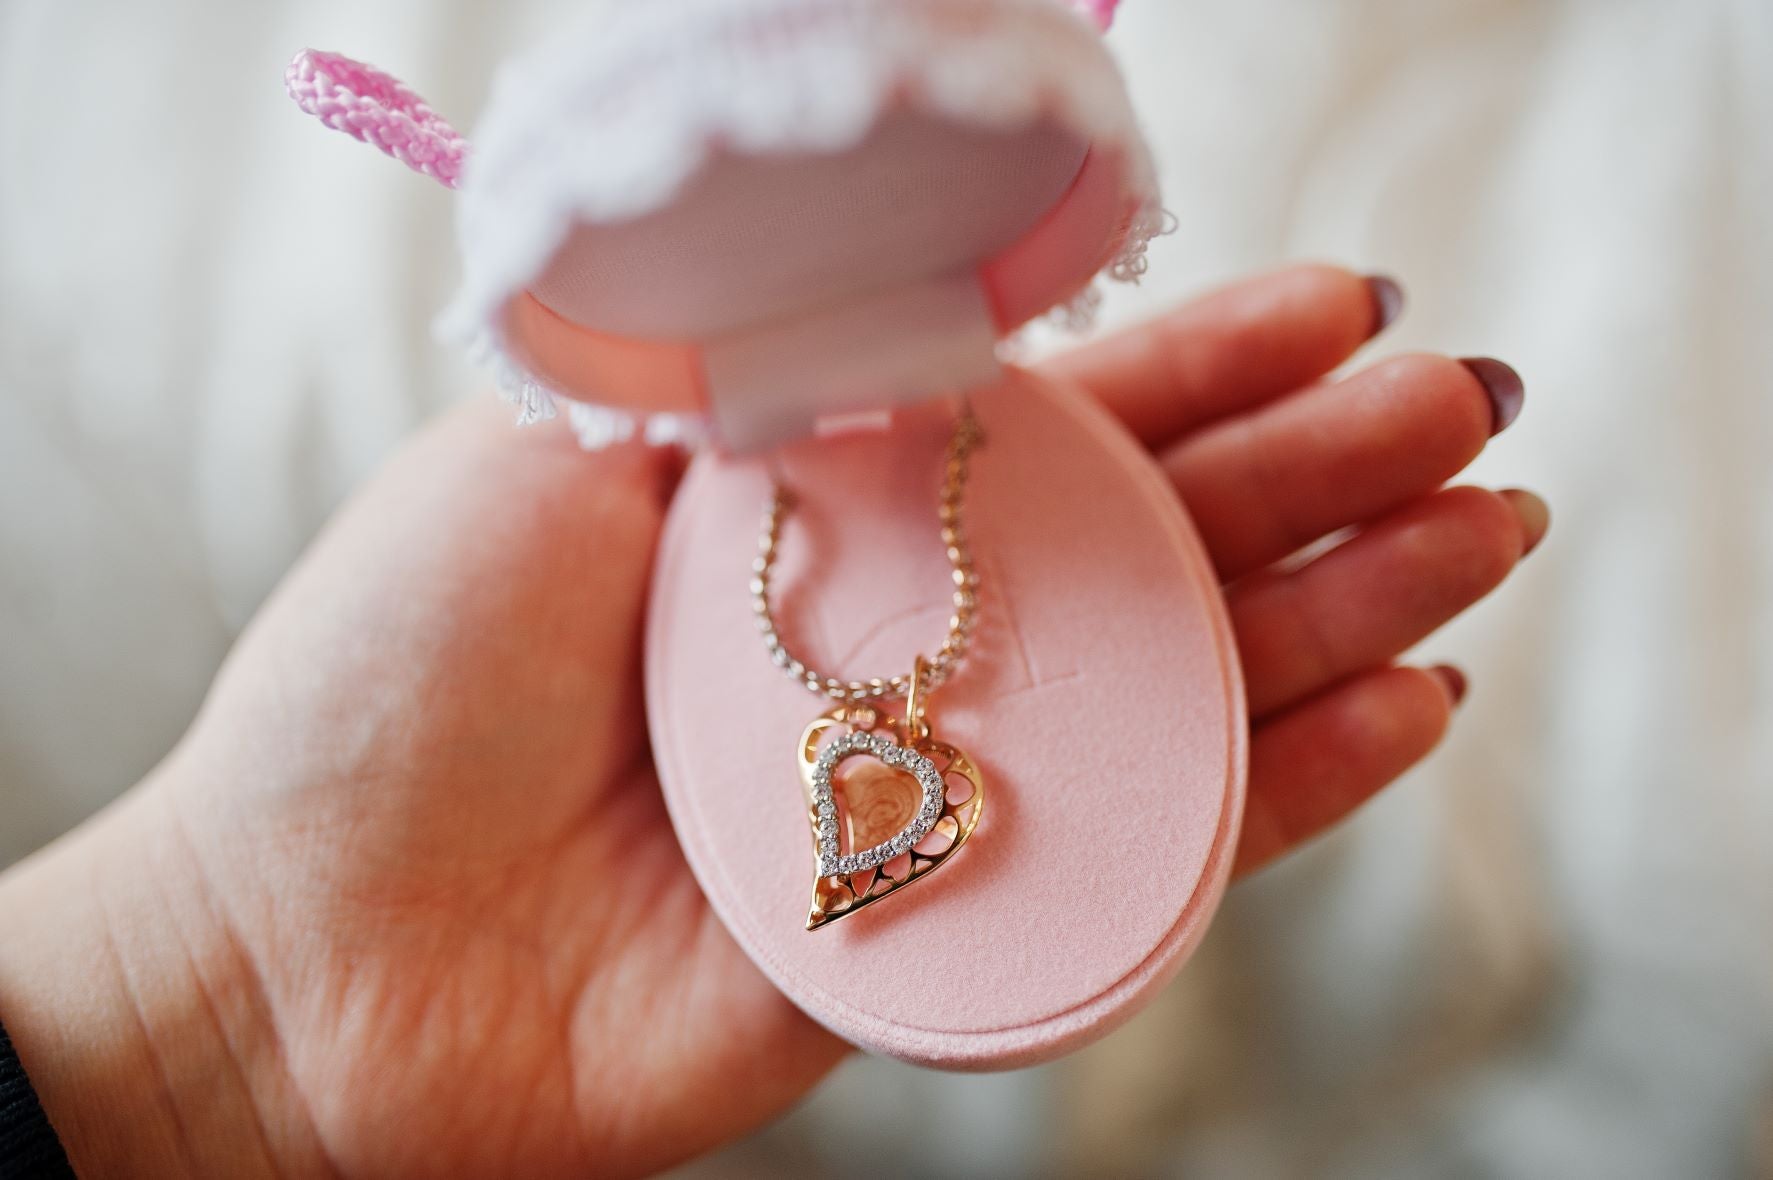 Baby Bling: Understanding Safe and Stylish Jewelry Options for Your Little Ones